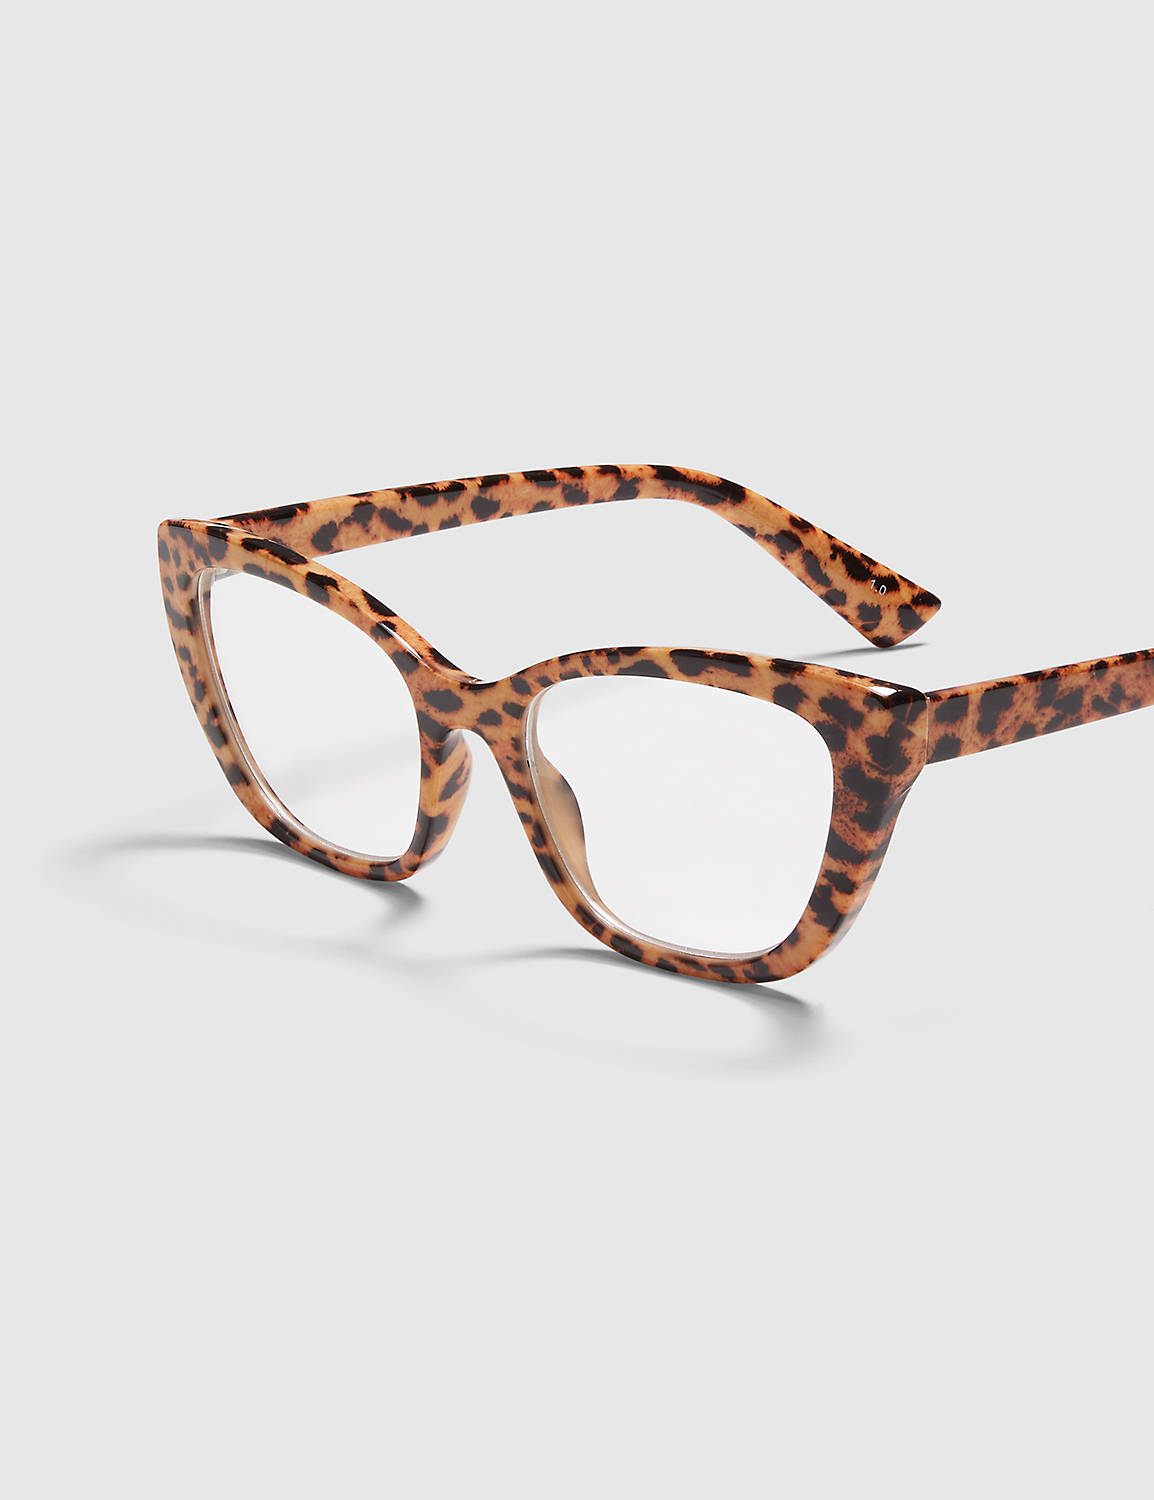 Leopard Cateye Reading Glasses Product Image 1